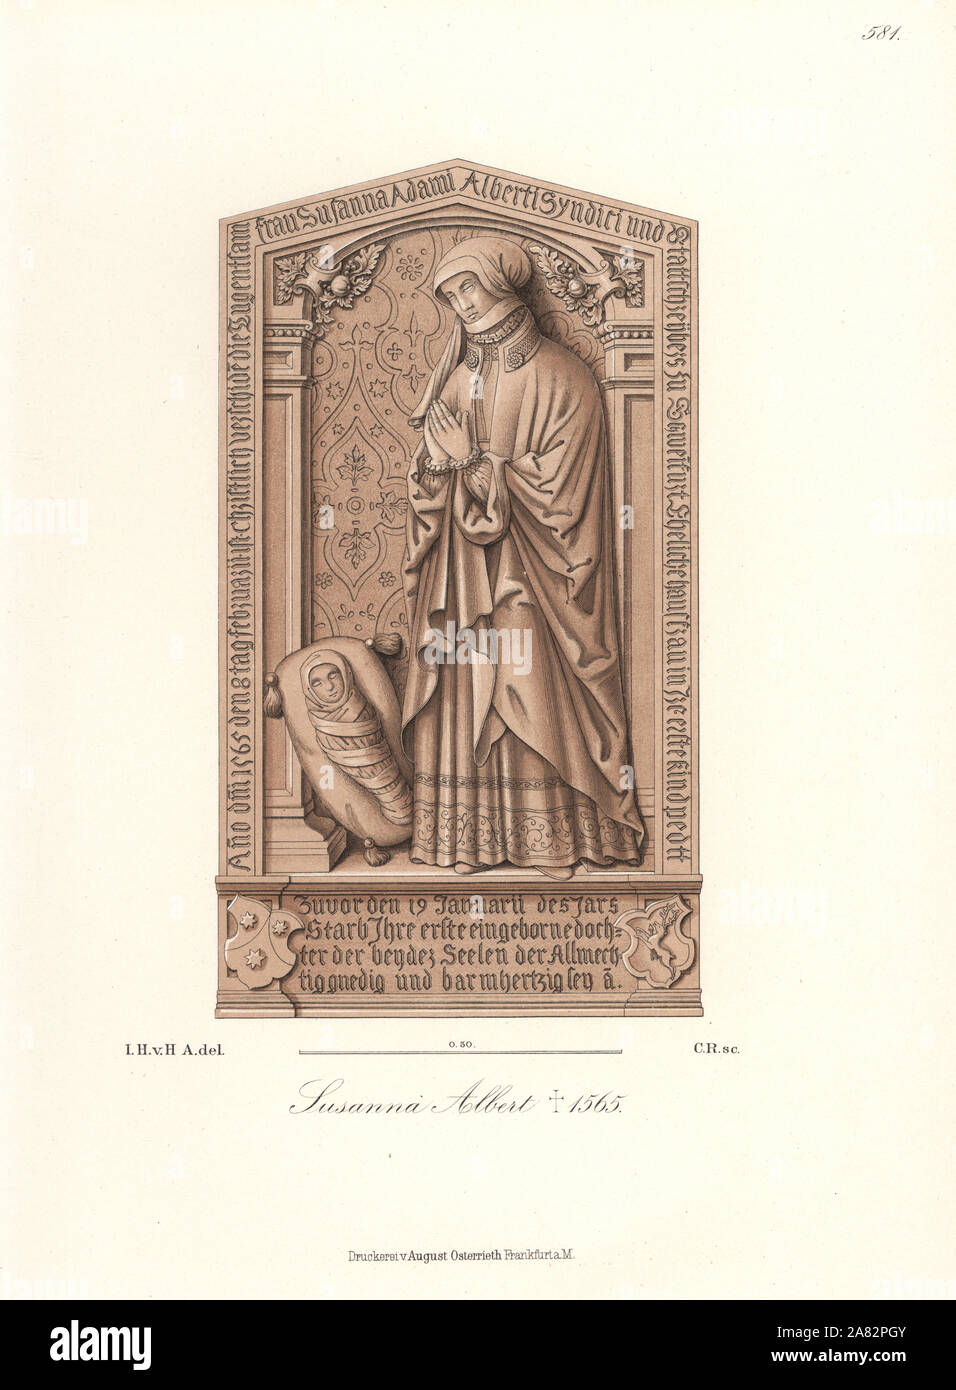 Basrelief gravestone of Susannna Albert, died 1565, wife of Adam Albert, counsel and town clerk. Chromolithograph from Hefner-Alteneck's Costumes, Artworks and Appliances from the Middle Ages to the 17th Century, Frankfurt, 1889. Illustration by Dr. Jakob Heinrich von Hefner-Alteneck, lithographed by C. Regnier. Dr. Hefner-Alteneck (1811-1903) was a German museum curator, archaeologist, art historian, illustrator and etcher. Stock Photo